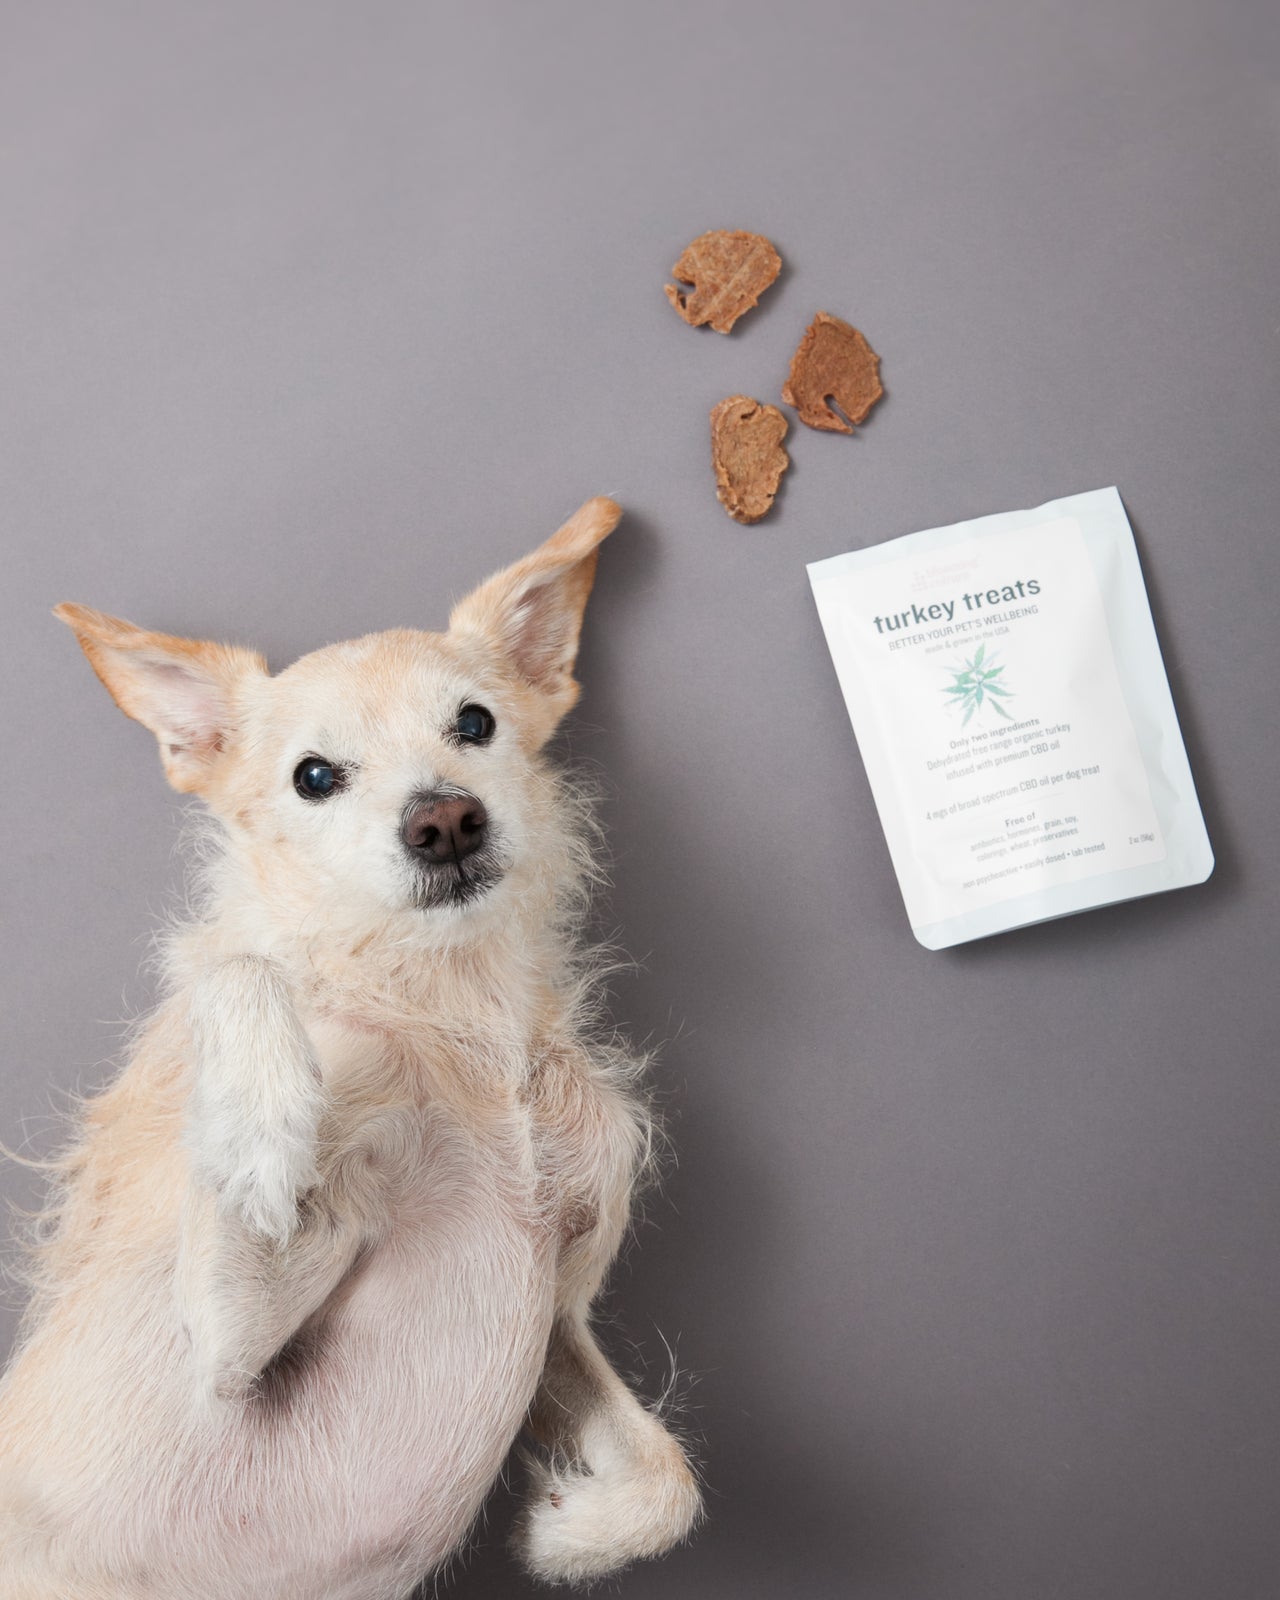 Dehydrated turkey treats for dogs infused with CBD oil | Blooming Culture